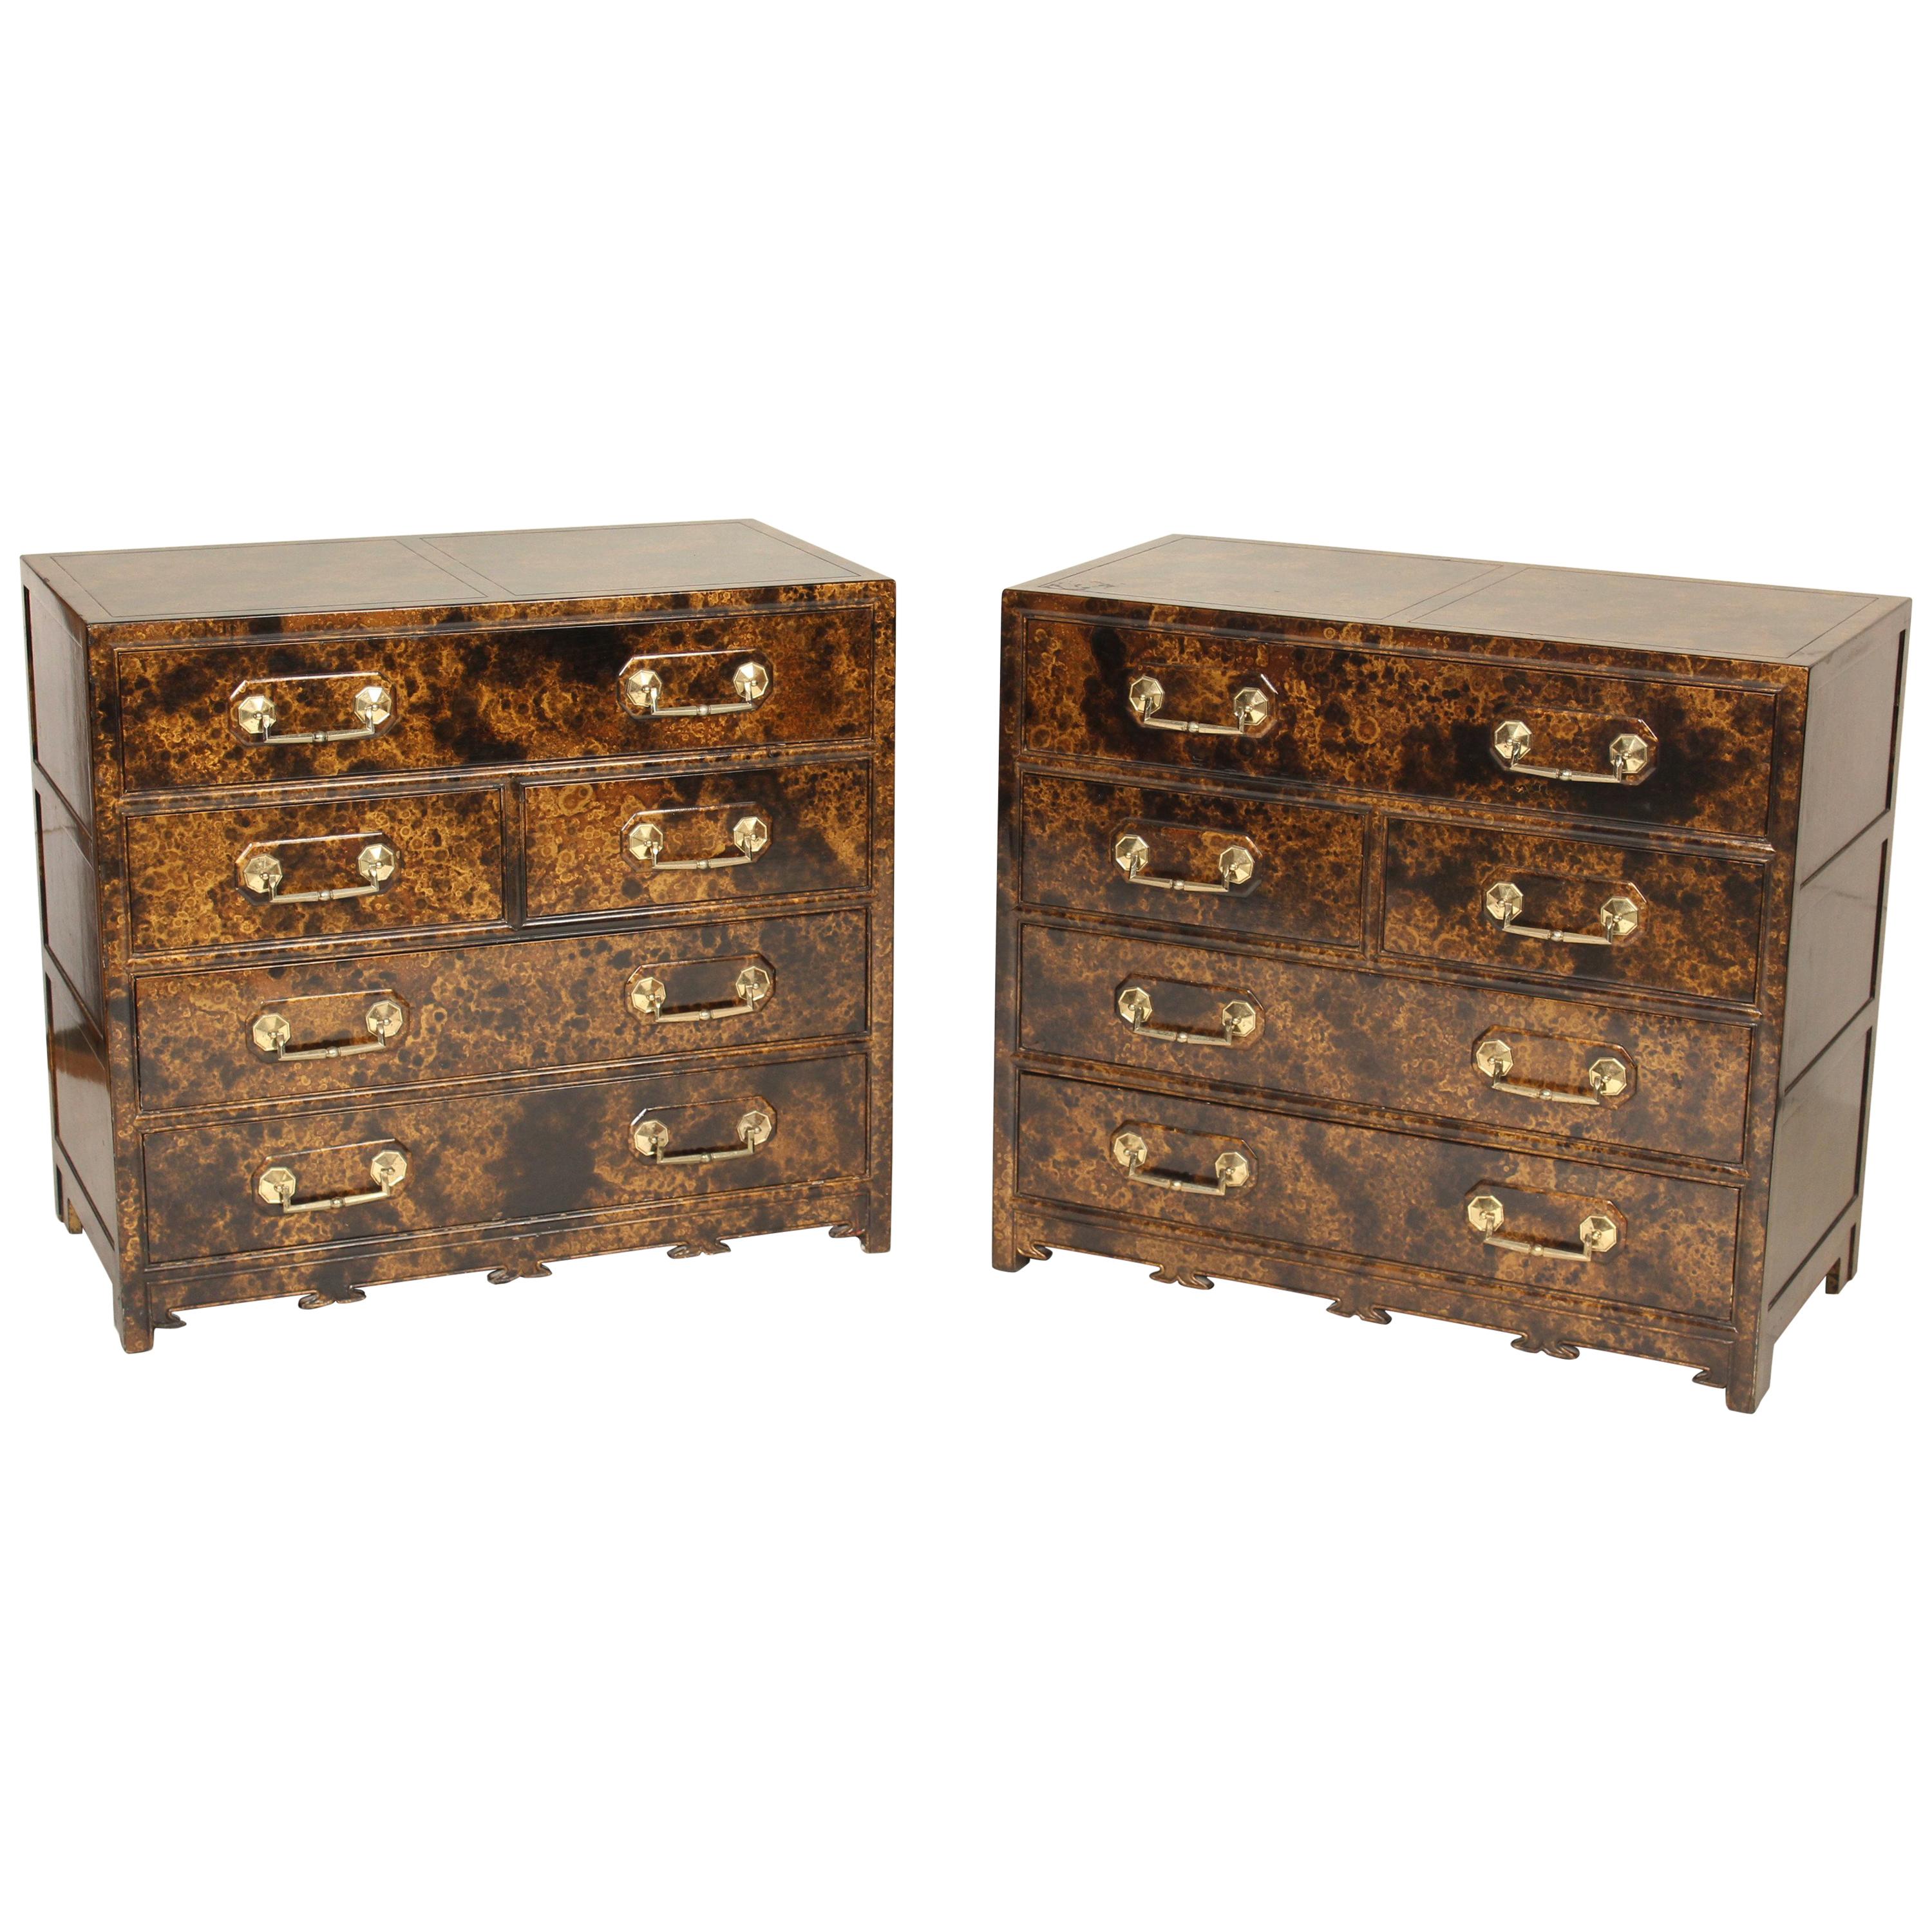 Pair of Lacquered Commodes by Baker